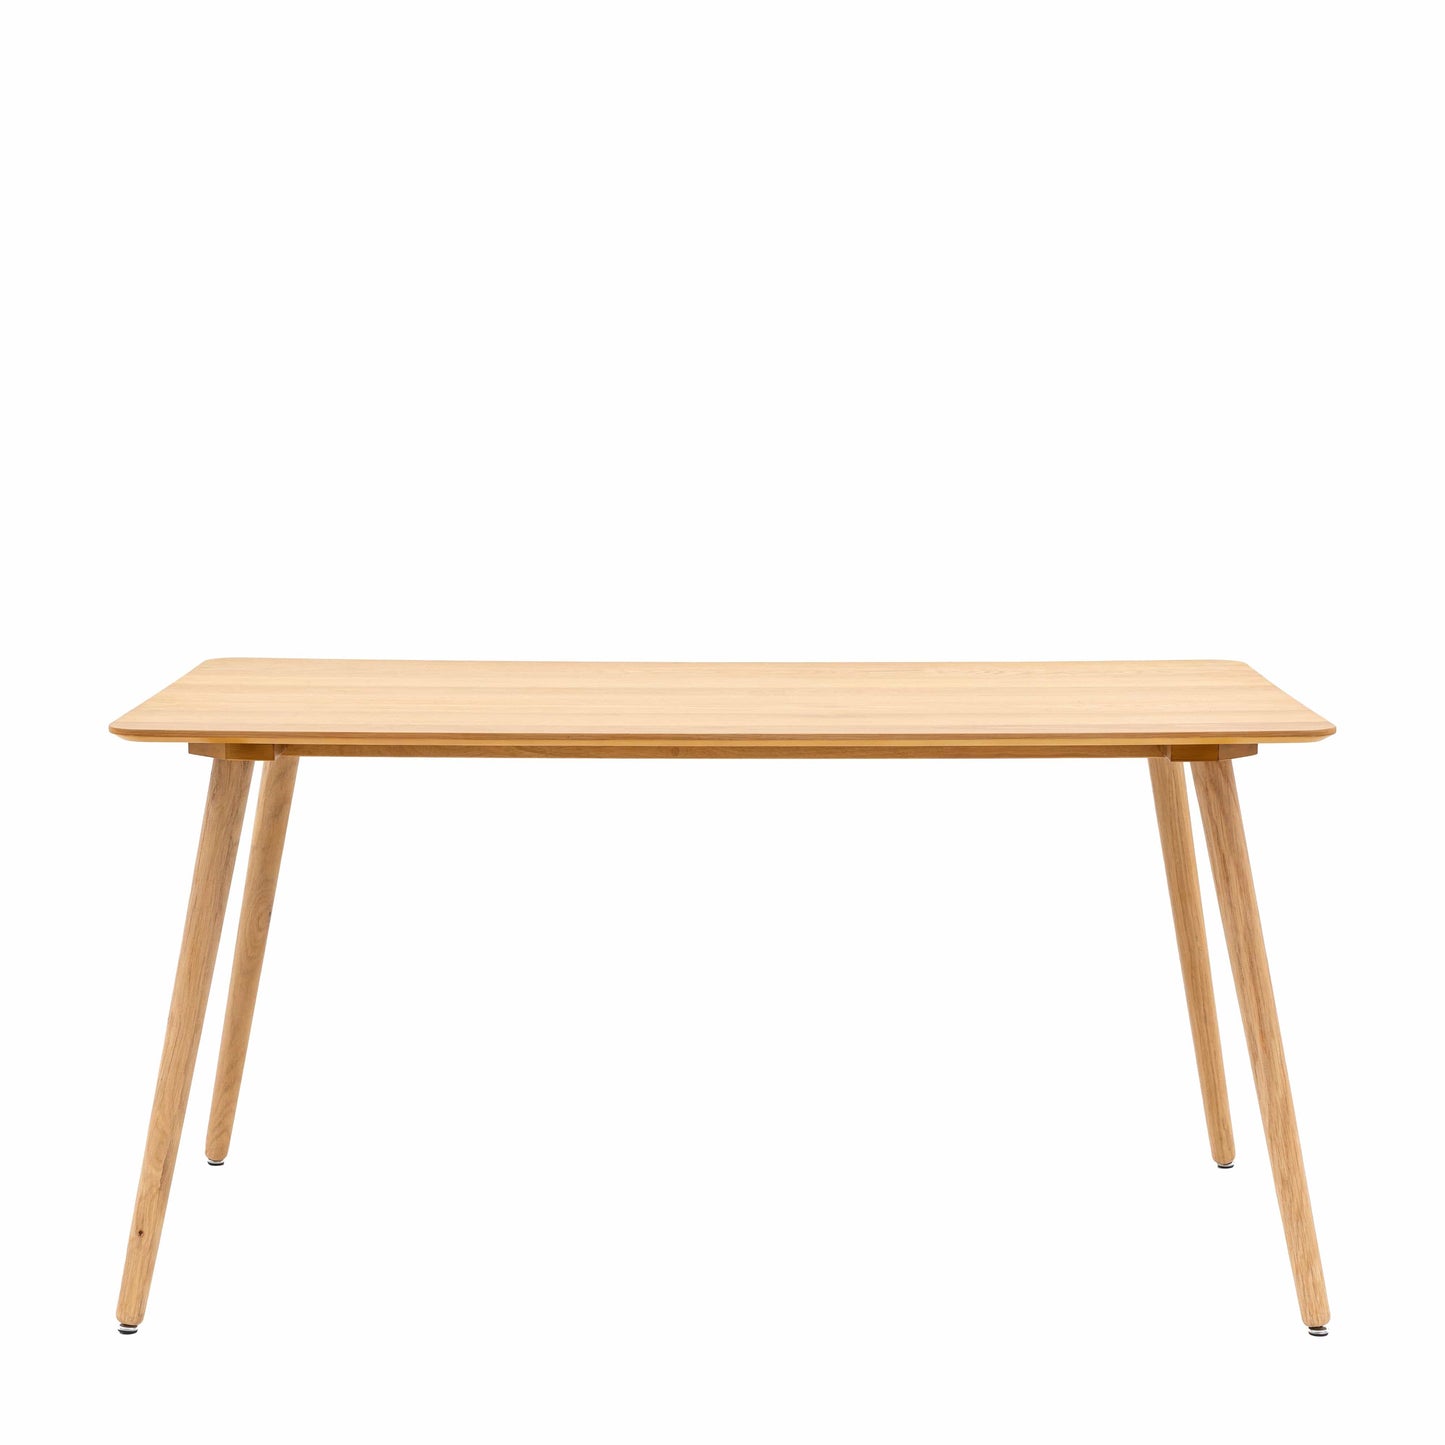 Hatfield Dining Table - Colour/Size Options